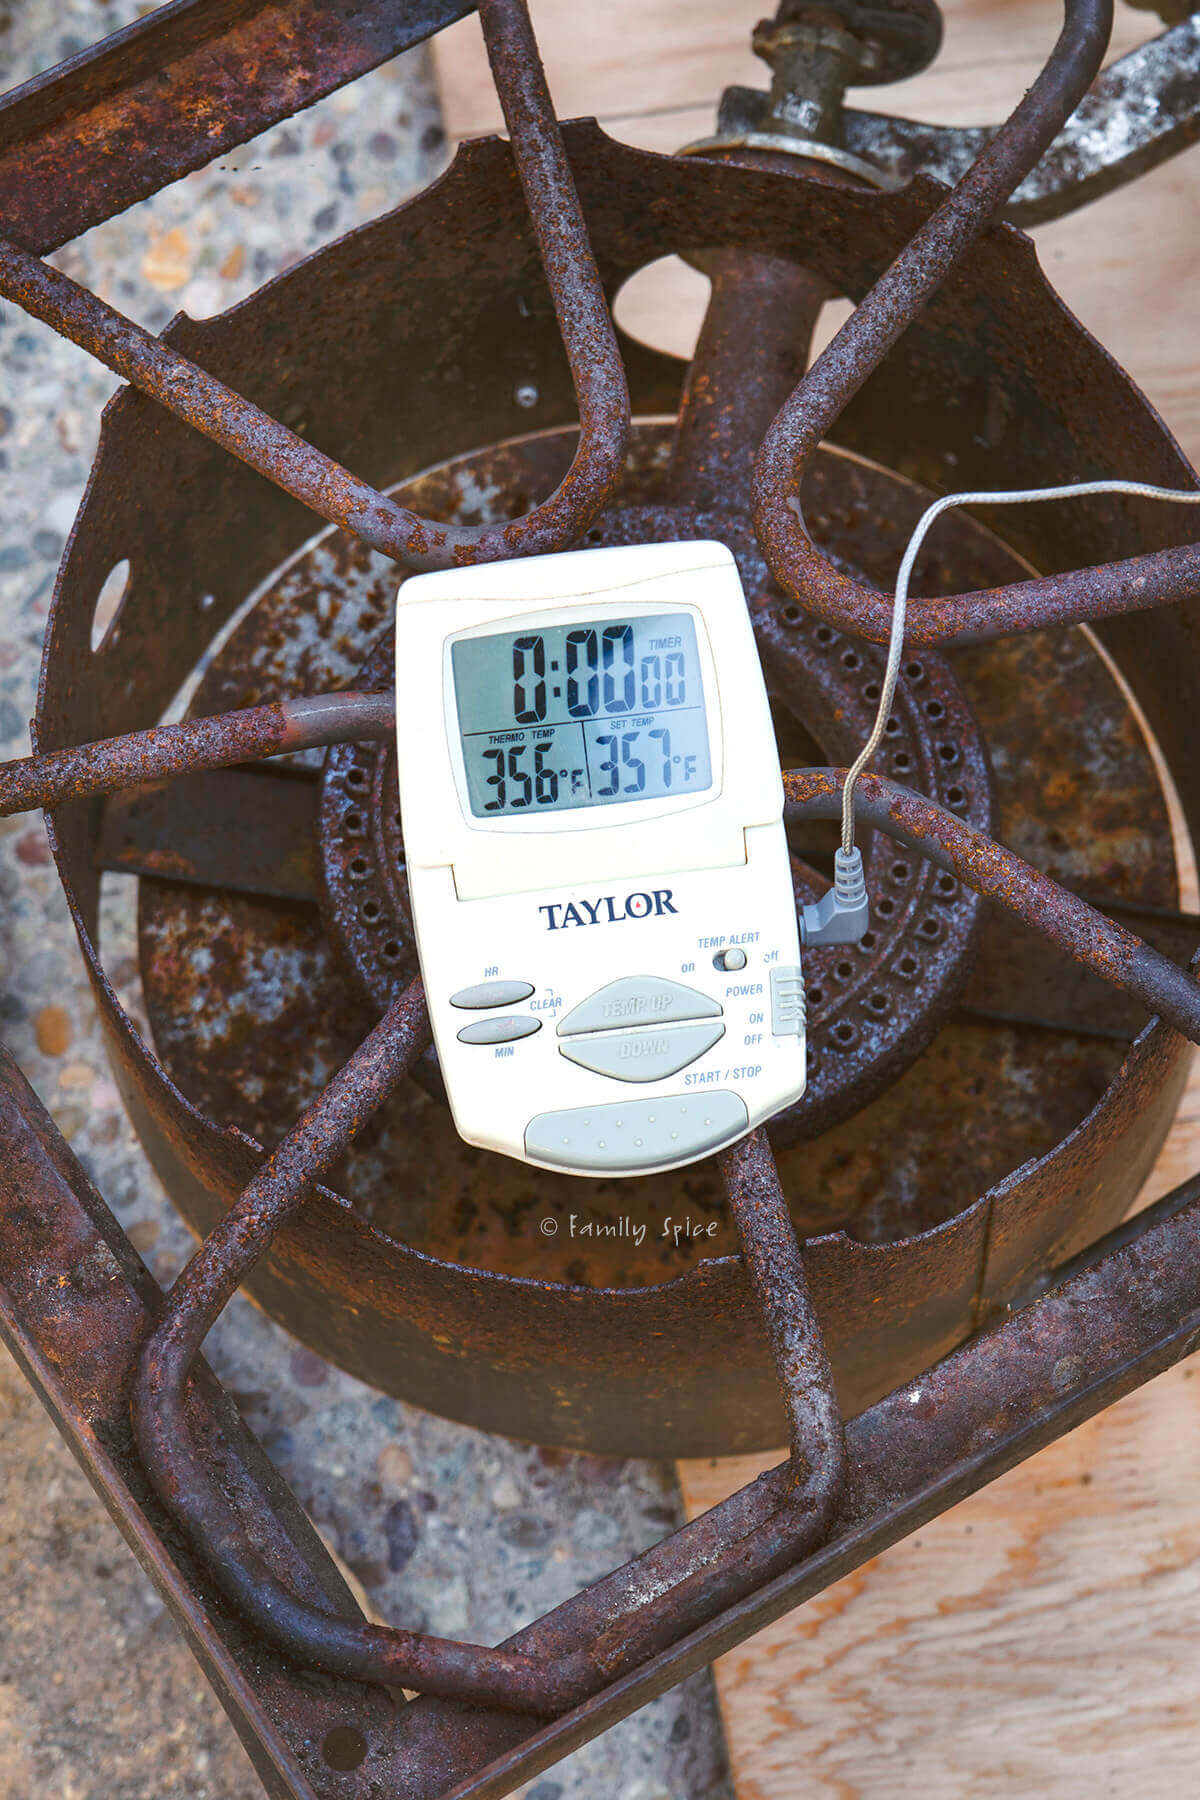 A meat thermometer showing the temperature of a deep fryer